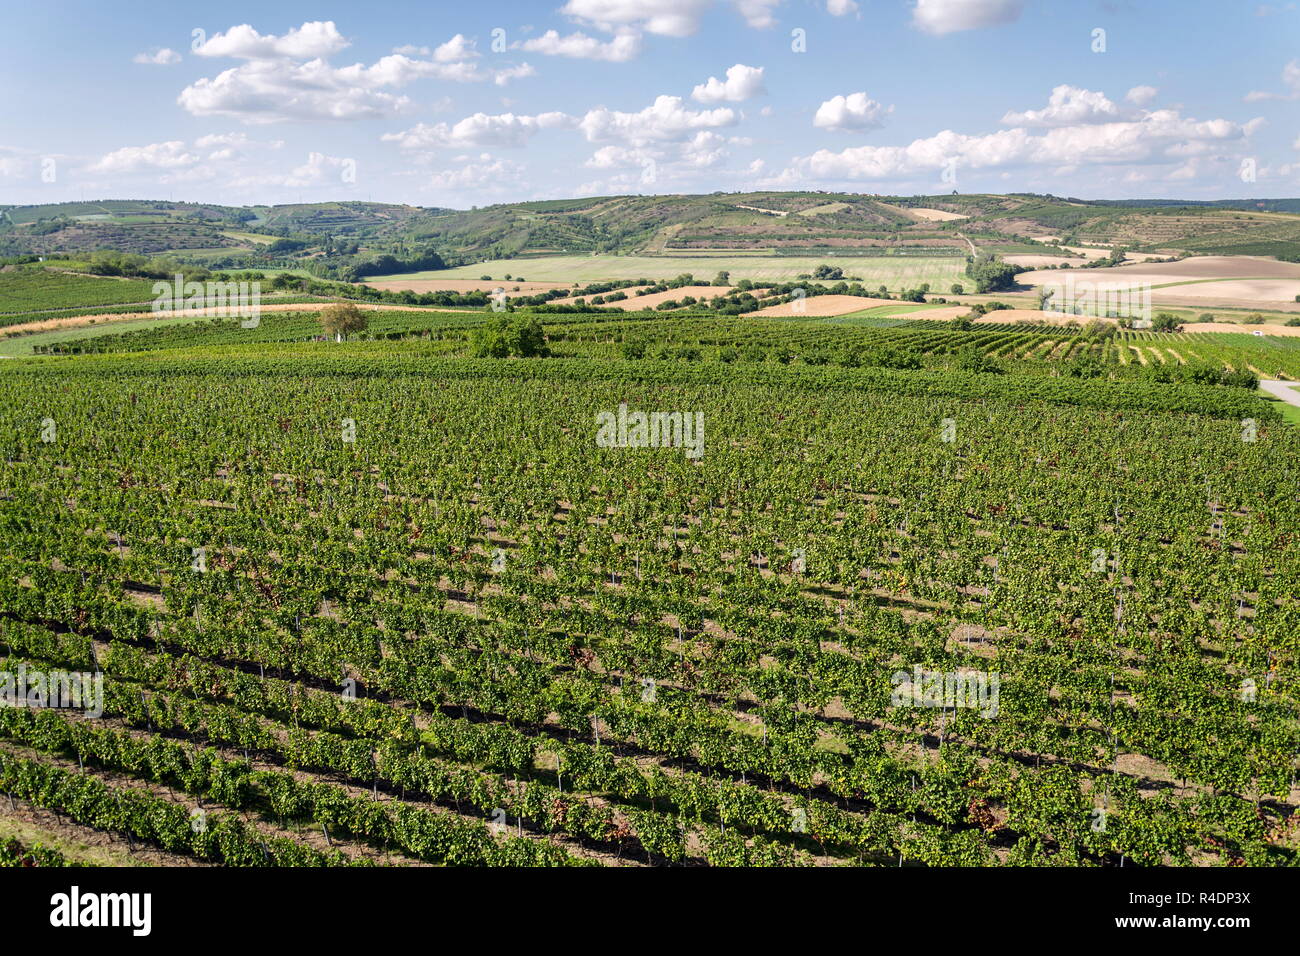 Beautiful vineyard landscape with grapes ready for harvest, sunny autumn day, Southern Moravia, Czech Republic, aerial view Stock Photo